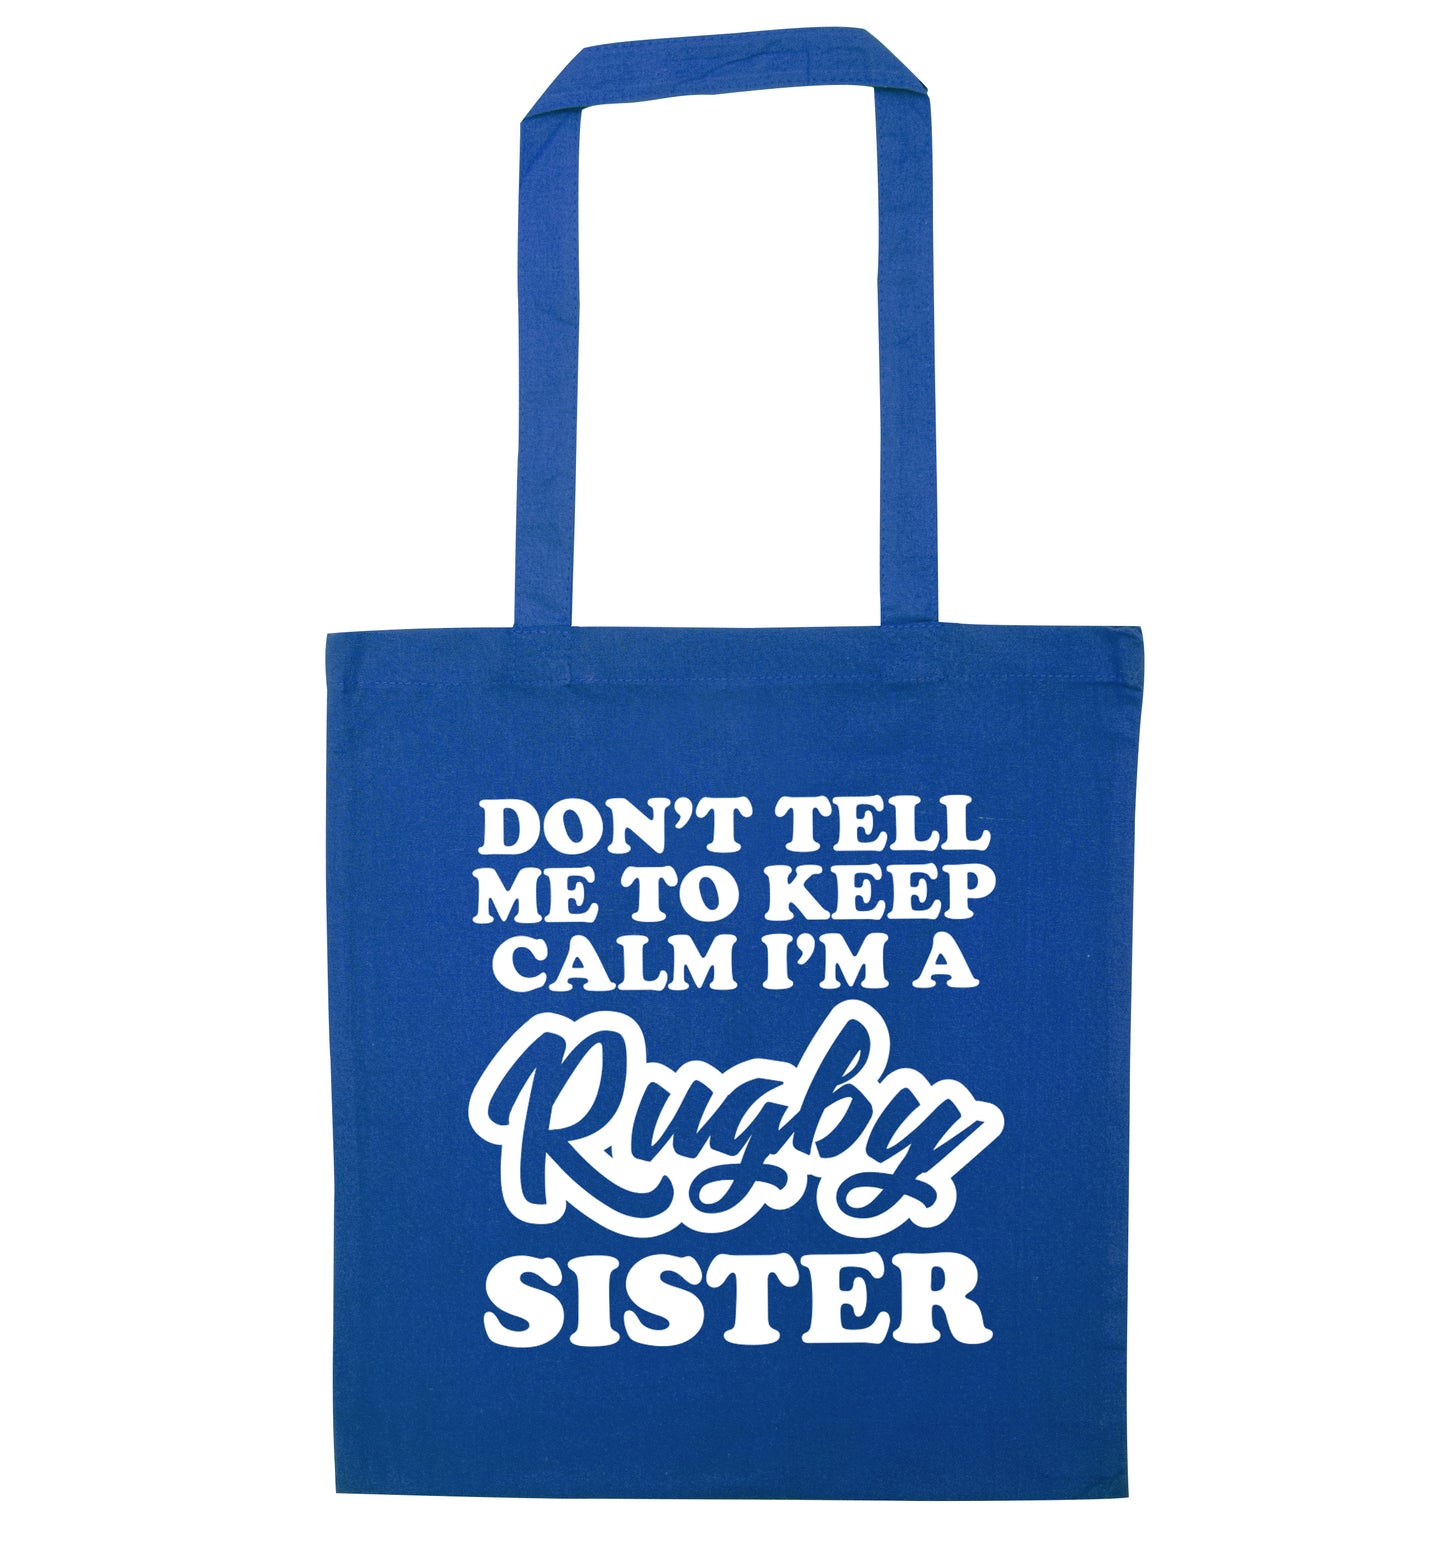 Don't tell me keep calm I'm a rugby sister blue tote bag